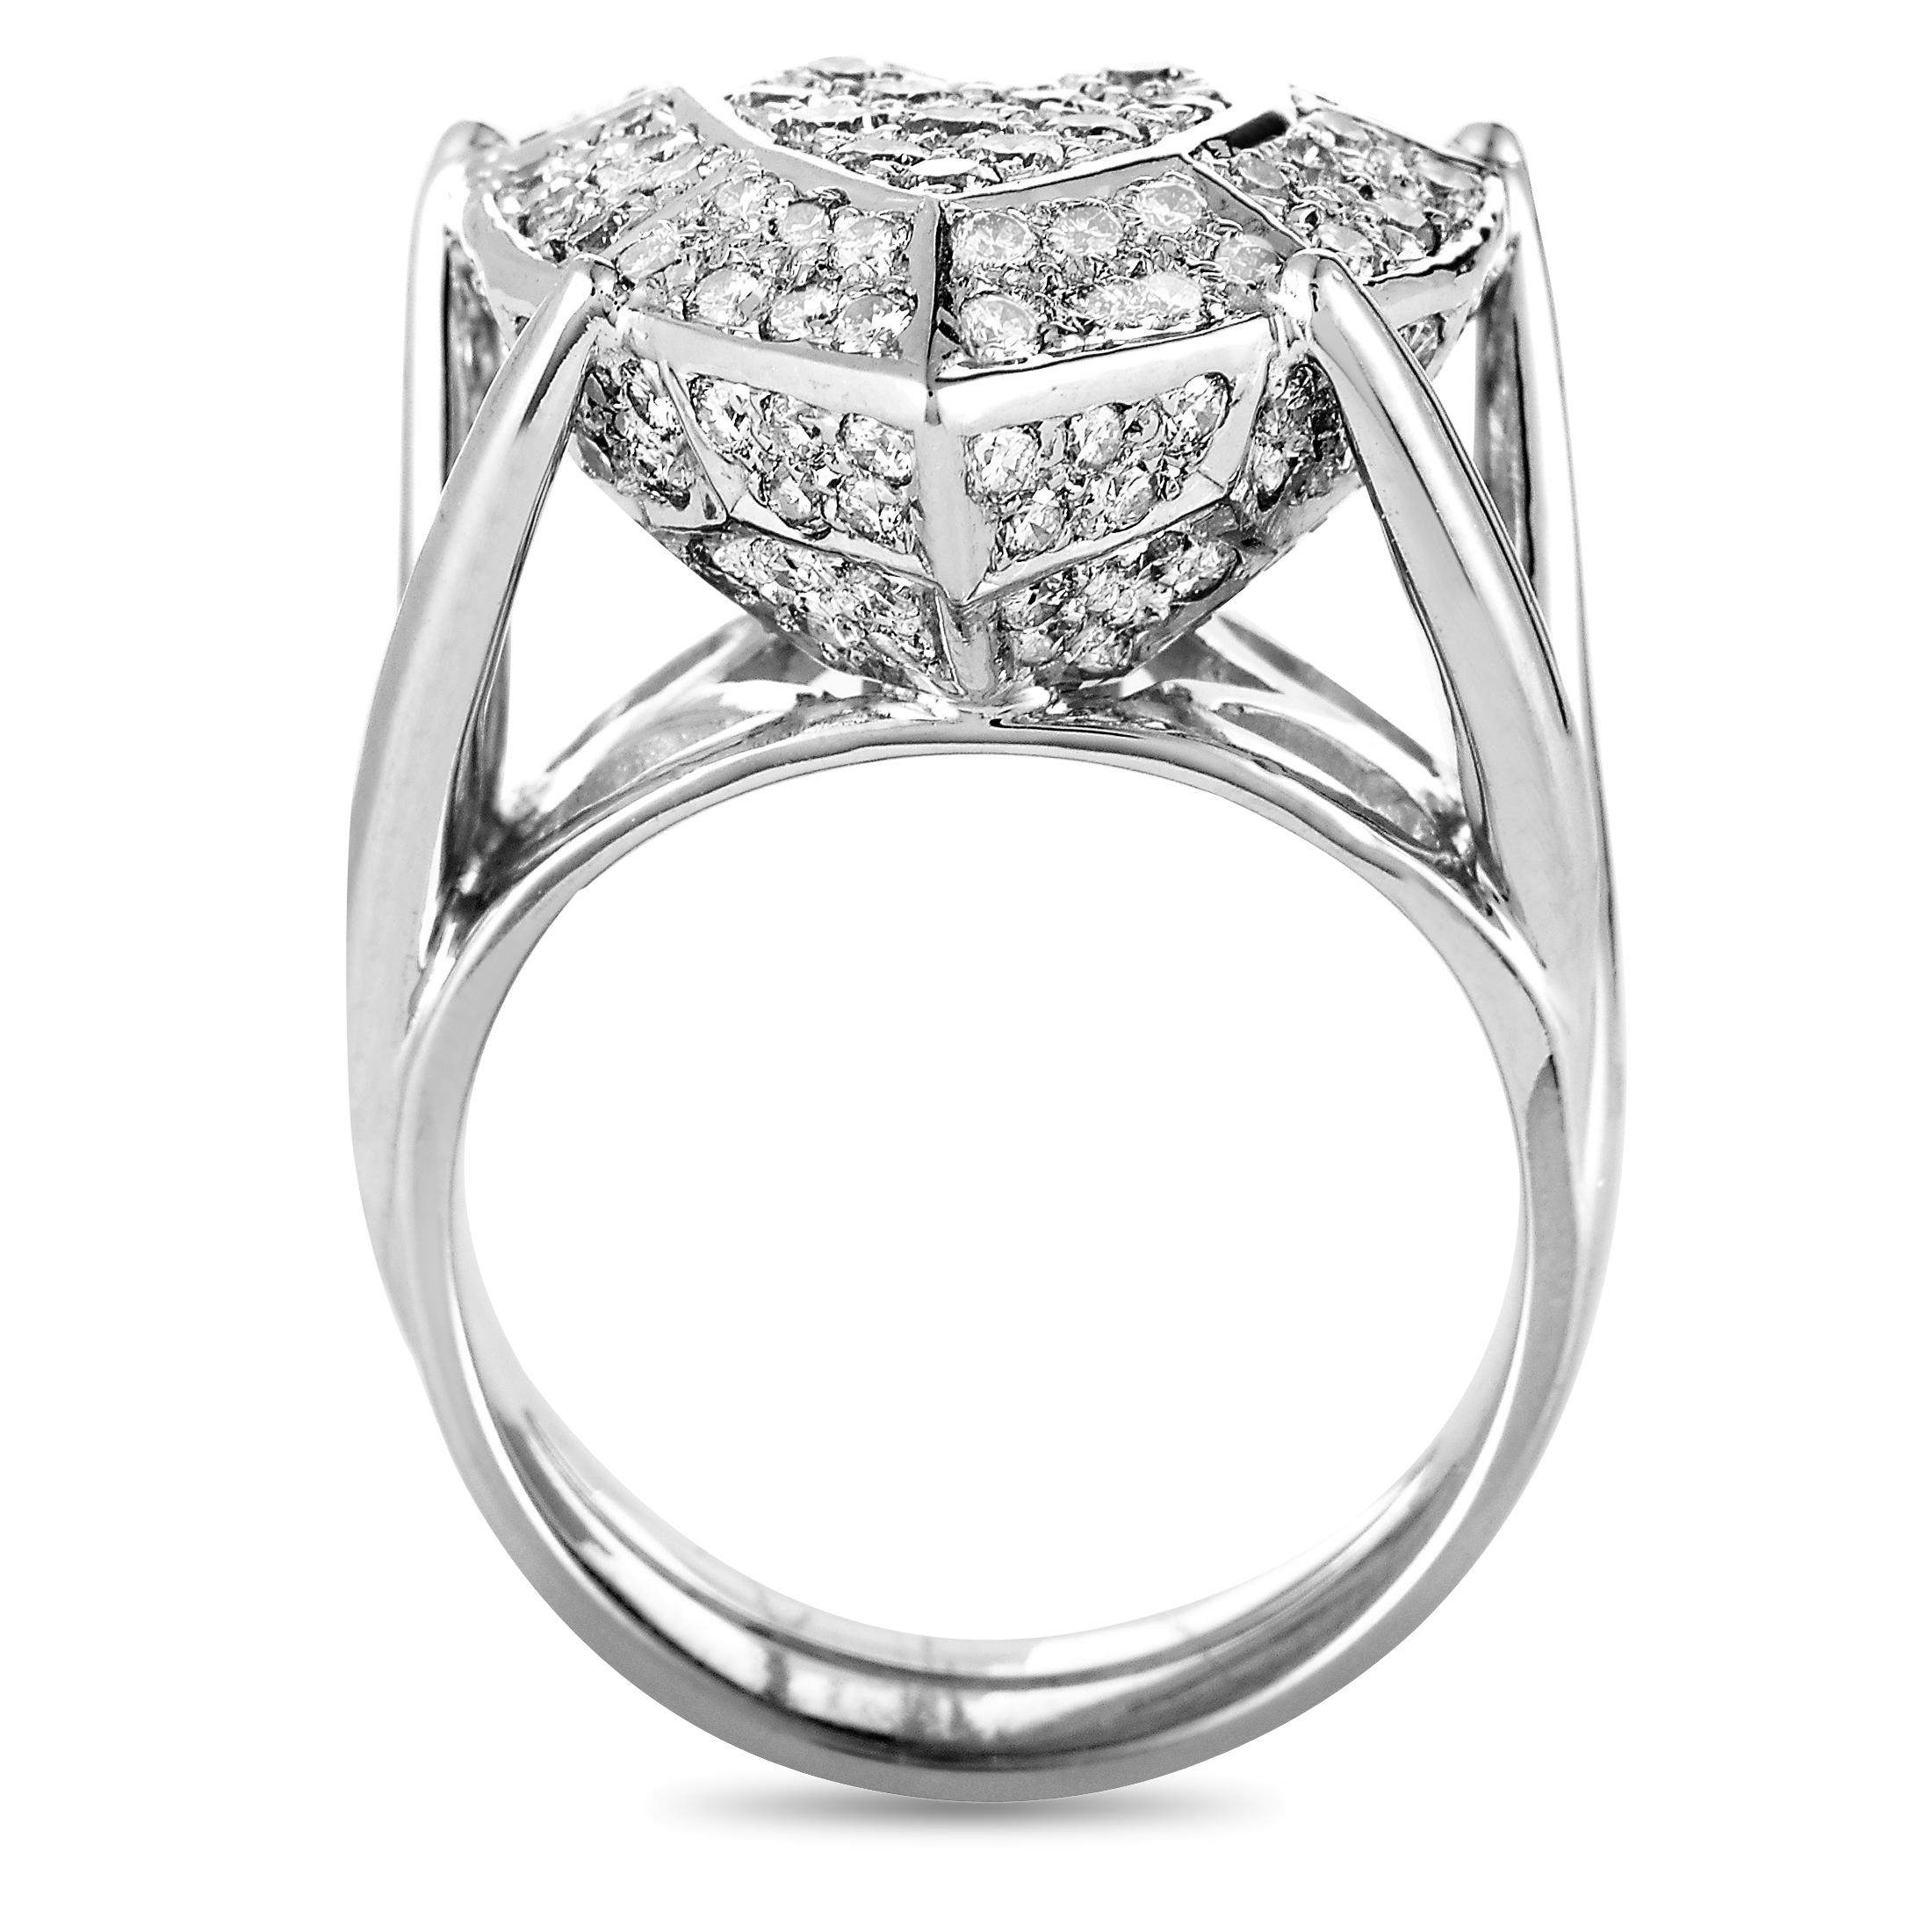 This ring is made out of 18K white gold and diamonds that amount to 1.87 carats. The ring weighs 16.4 grams, boasting band thickness of 6 mm and top height of 10 mm, while top dimensions measure 18 by 20 mm.

Offered in estate condition, this